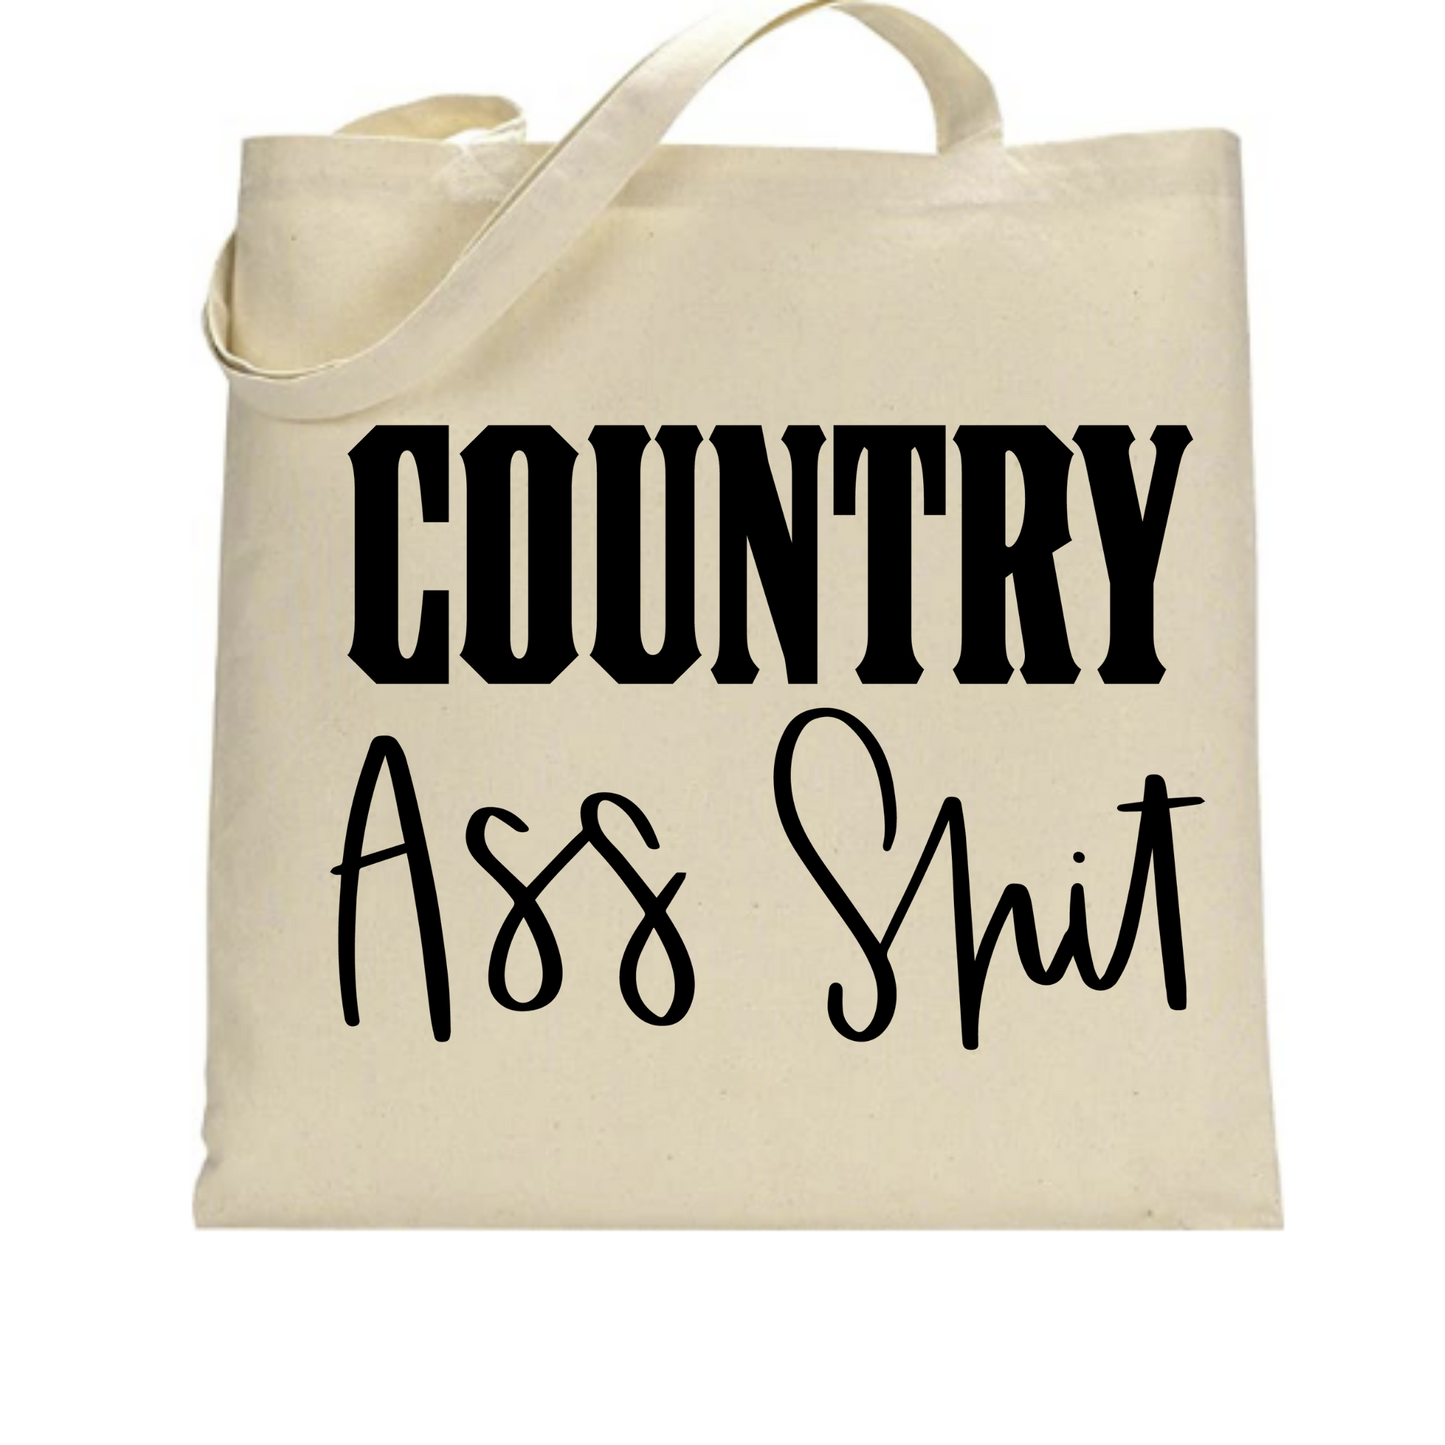 Country A$$ $hit Tote Bag - Mister Snarky's